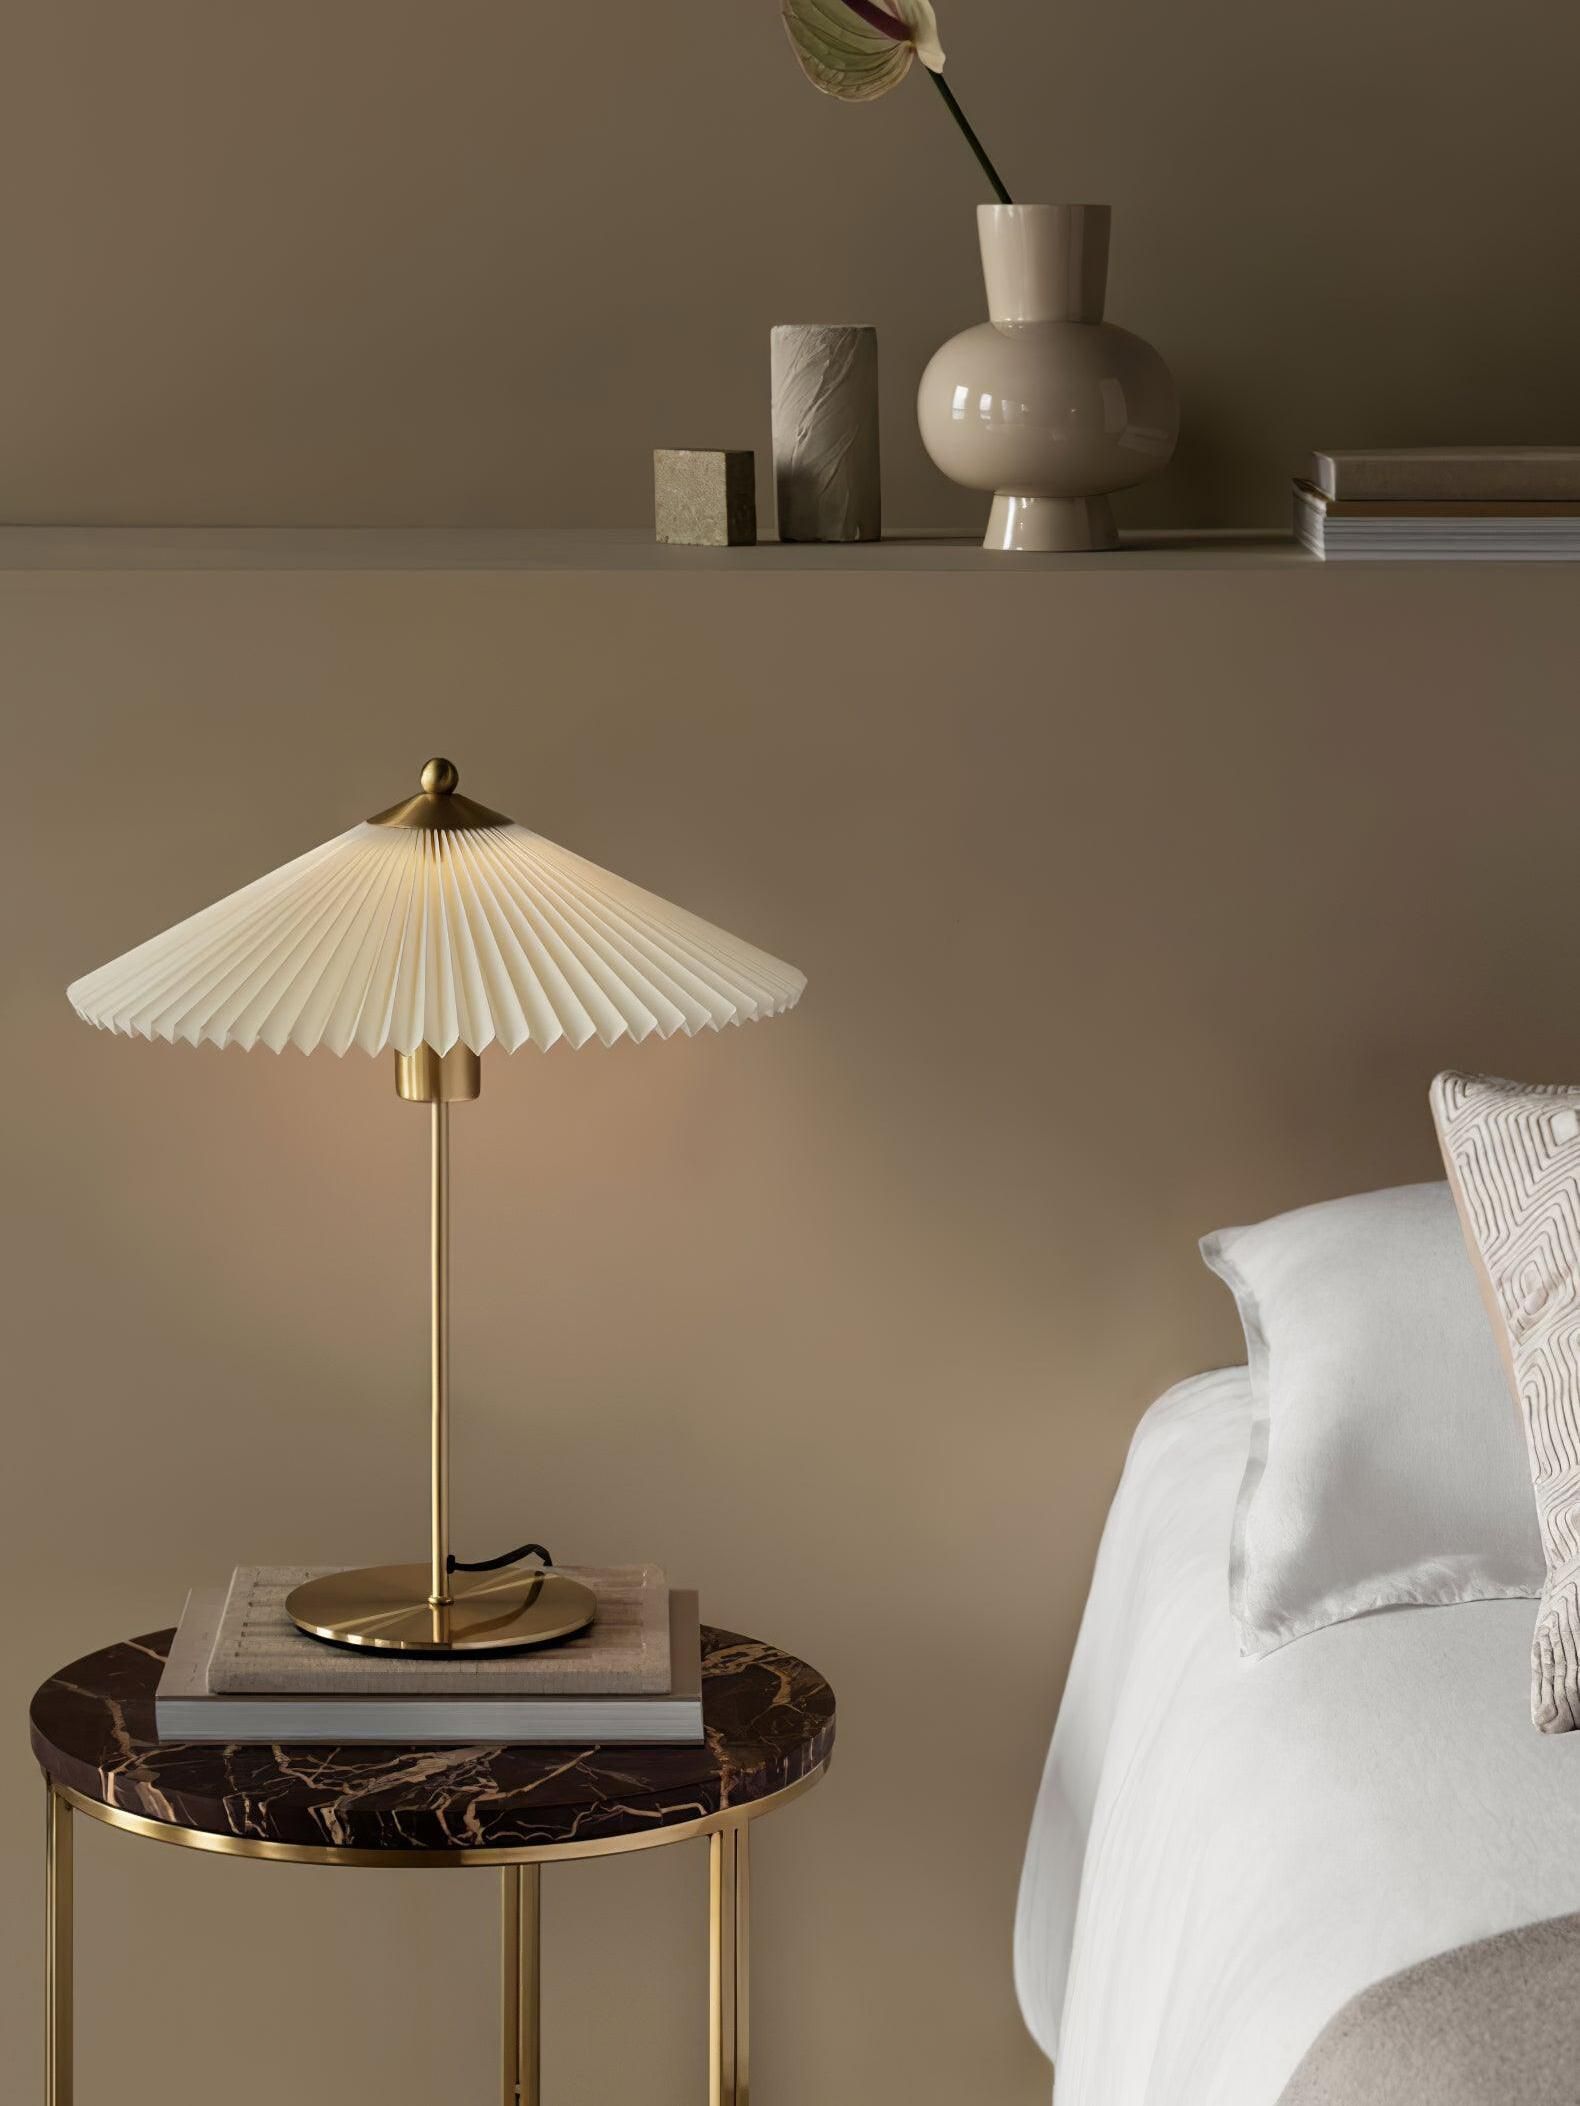 Bedside Side Lamps Enhance Your Bedroom With Stylish and Practical Lighting Options